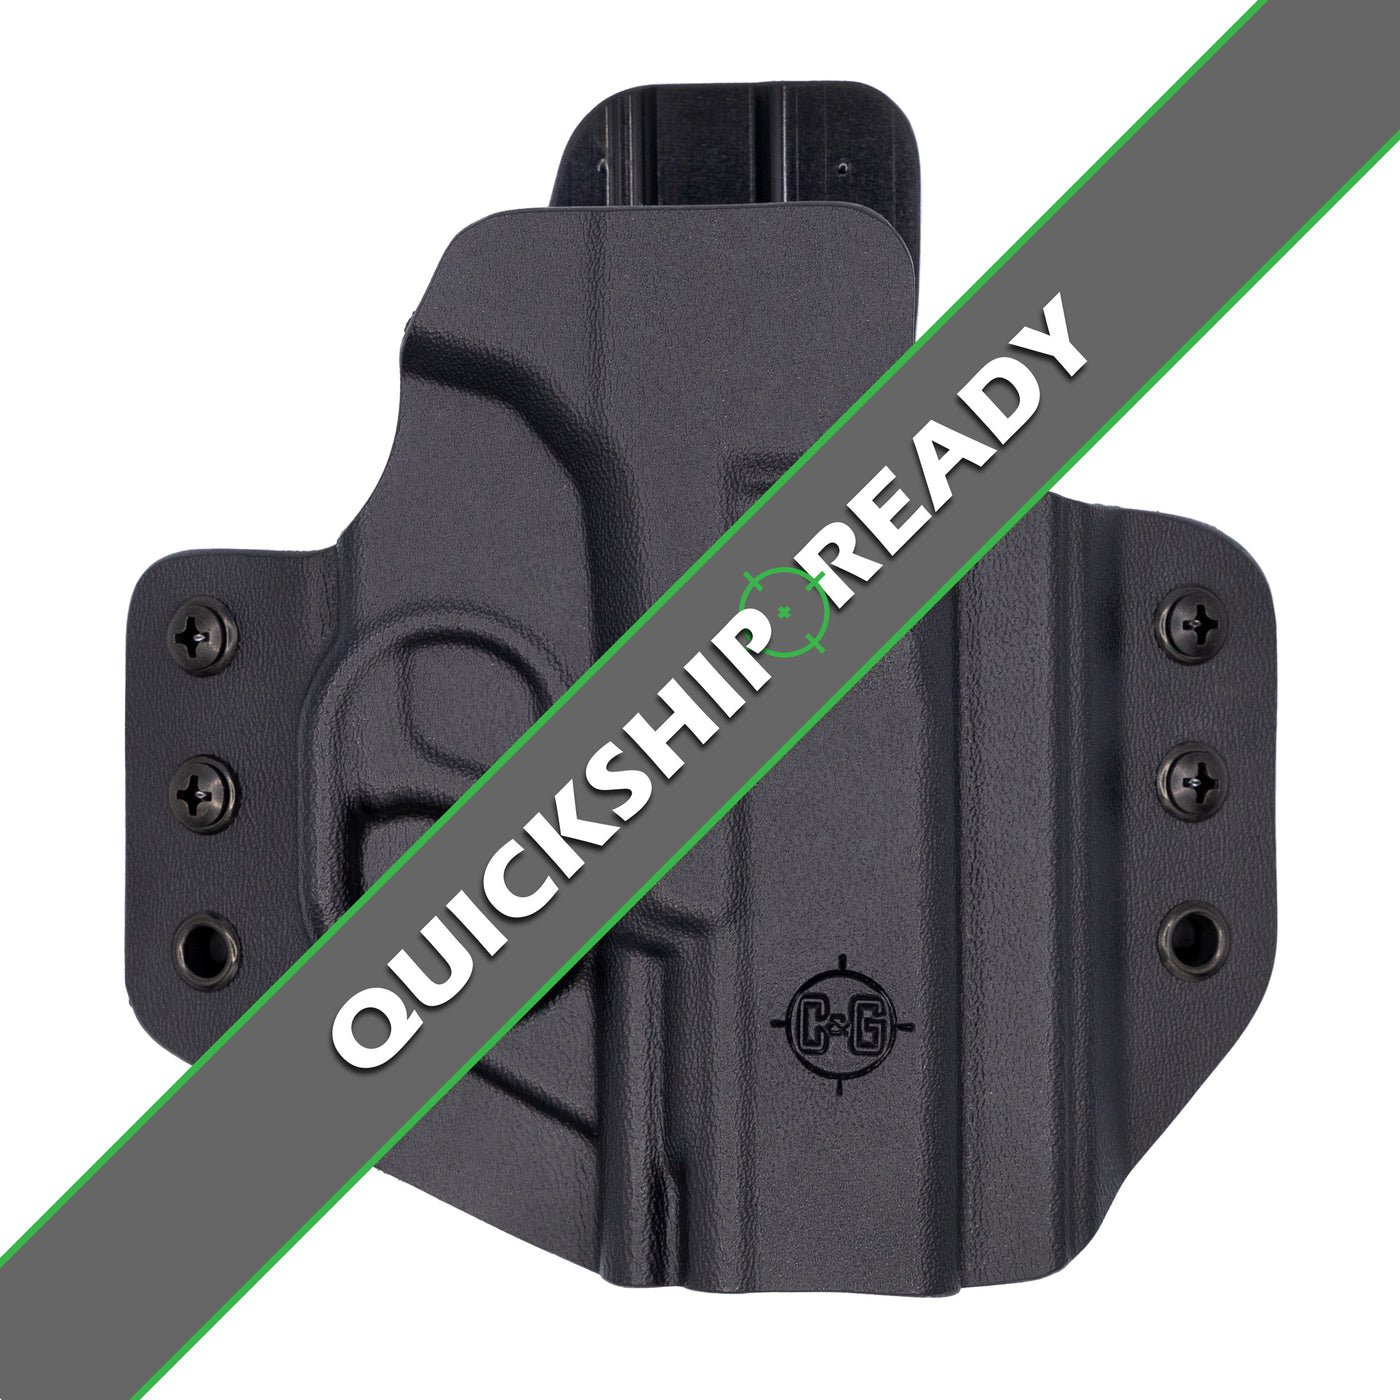 C&G Holsters quickship OWB Outside the waistband Holster for the Polymer80 Poly80 PF9/40c